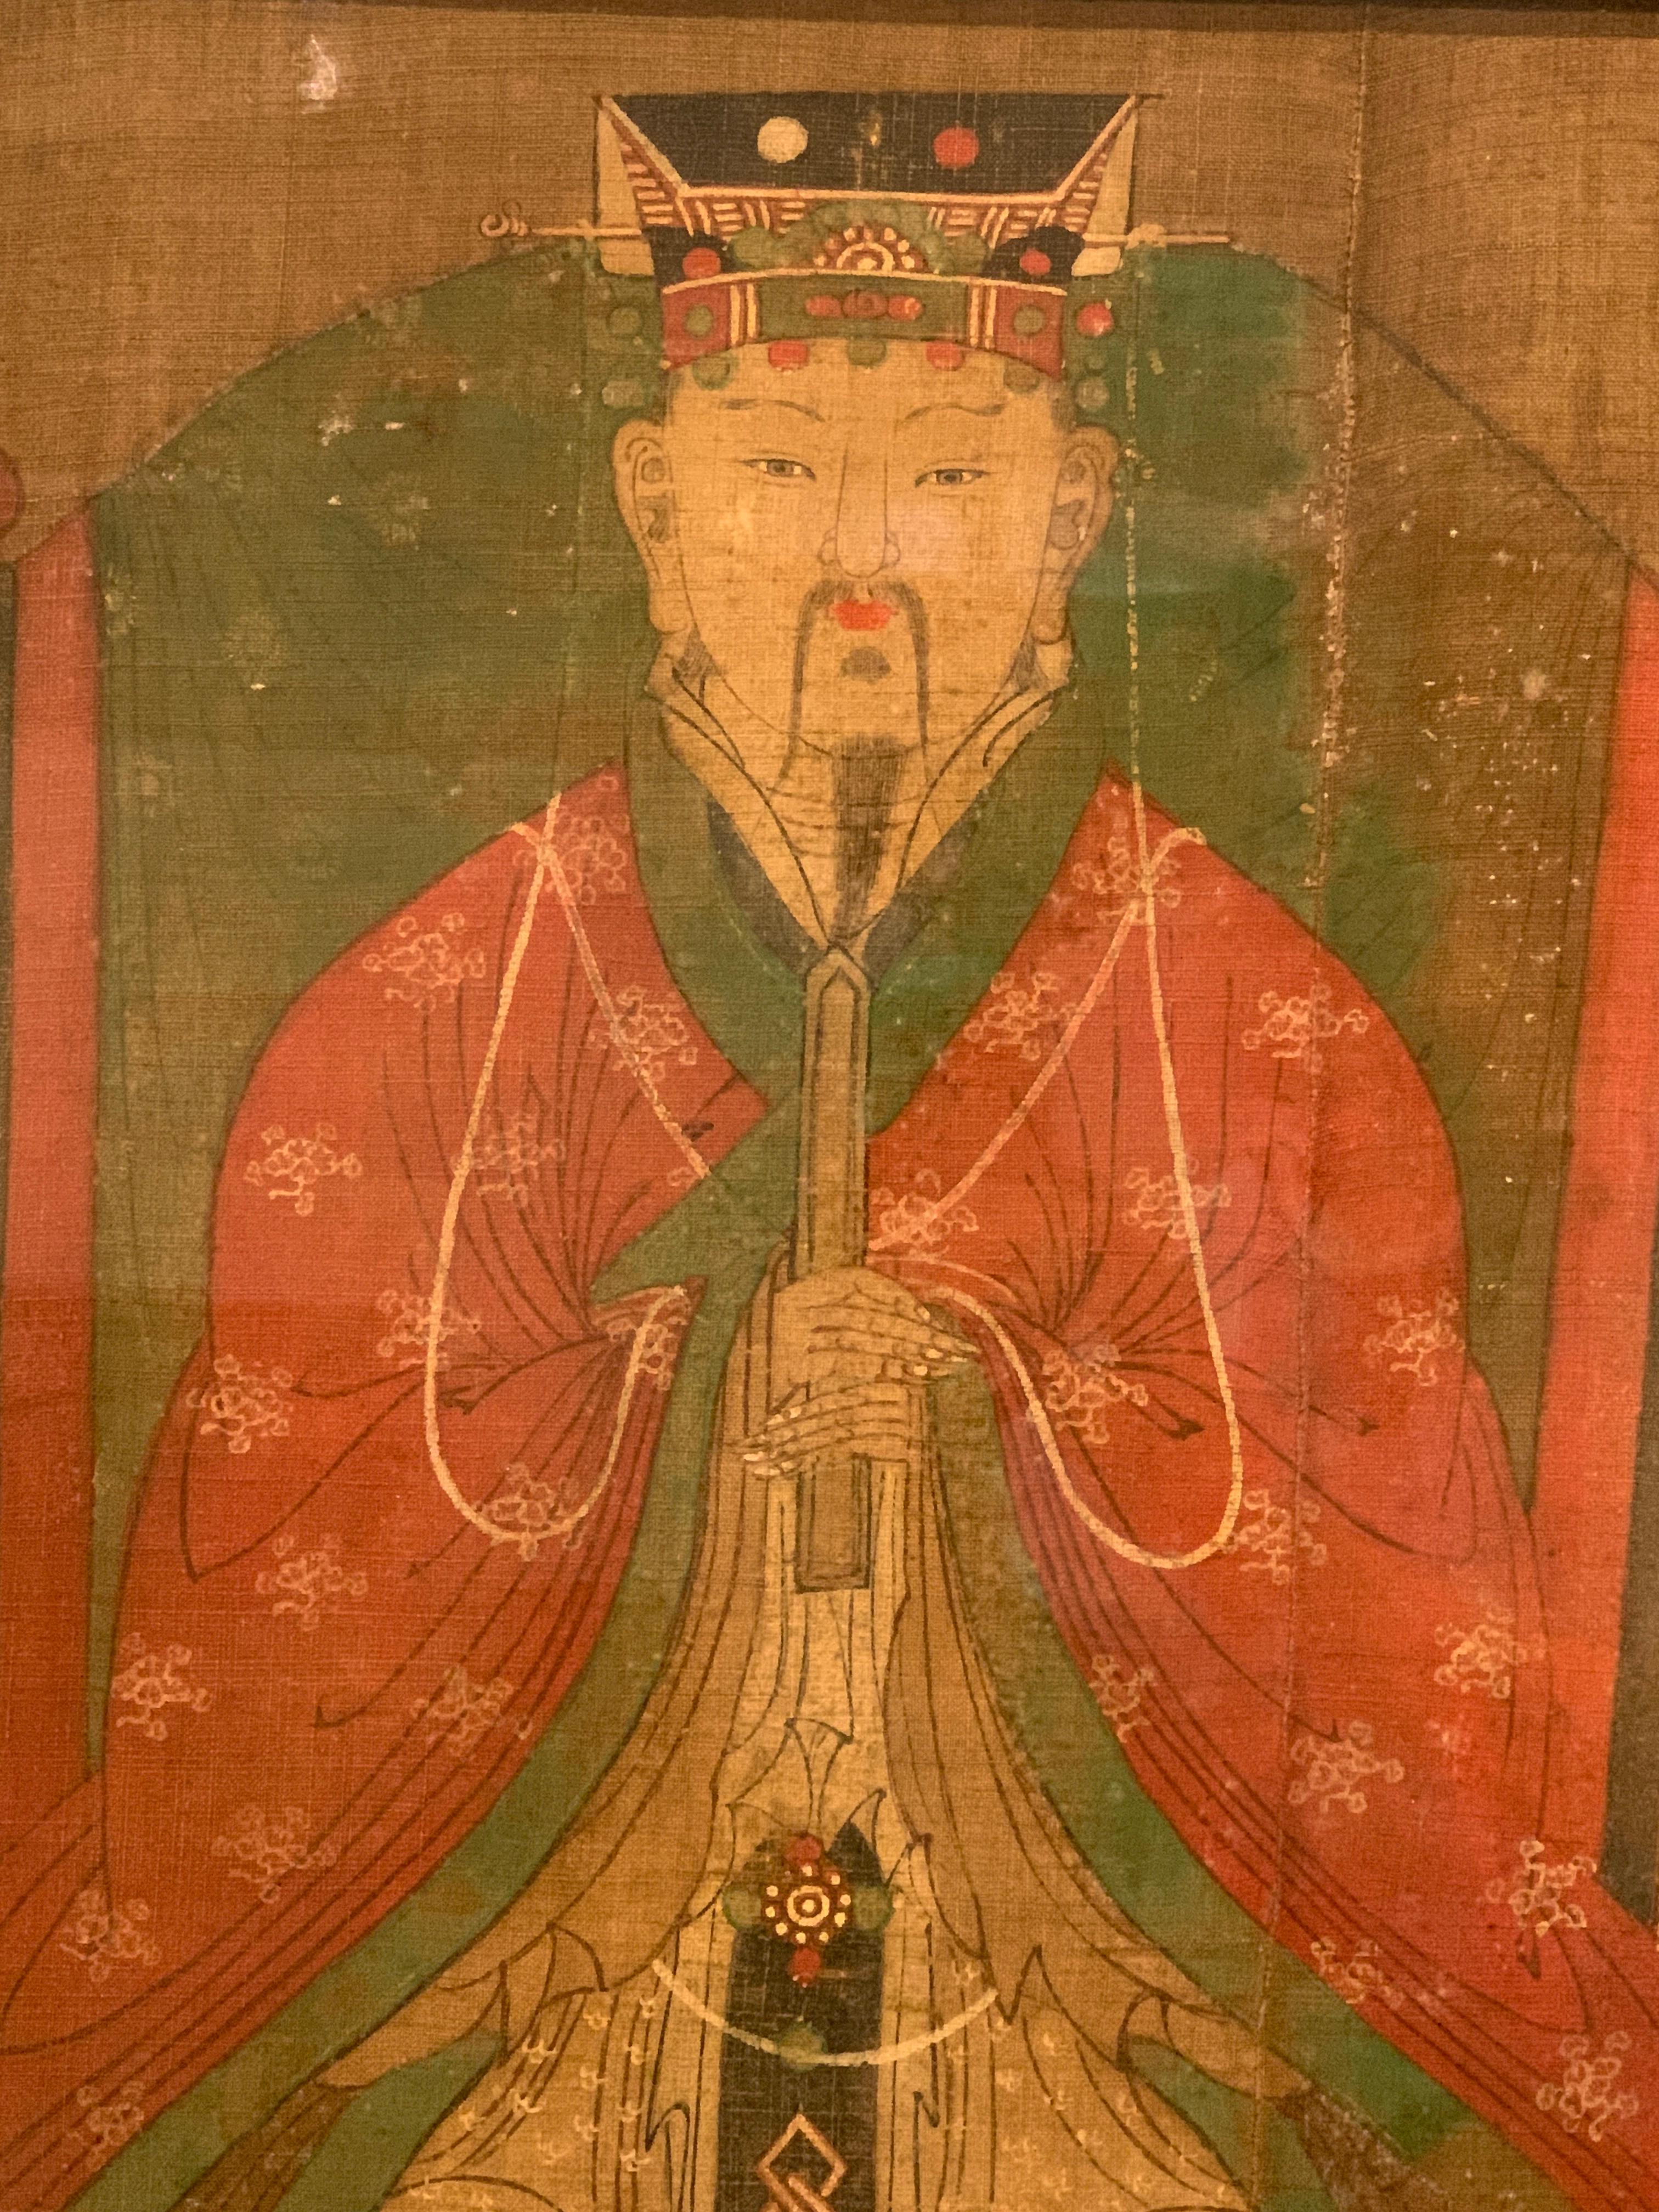 An extremely rare and important Korean Taoist painting of Nambang Yeomje, the Yan Emperor, Emperor of the South, known as in Korea and Nanfang Yandi in China, distemper on cloth, Joseon Dynasty (1392 to 1610), 18th century, Korea. 

This painting